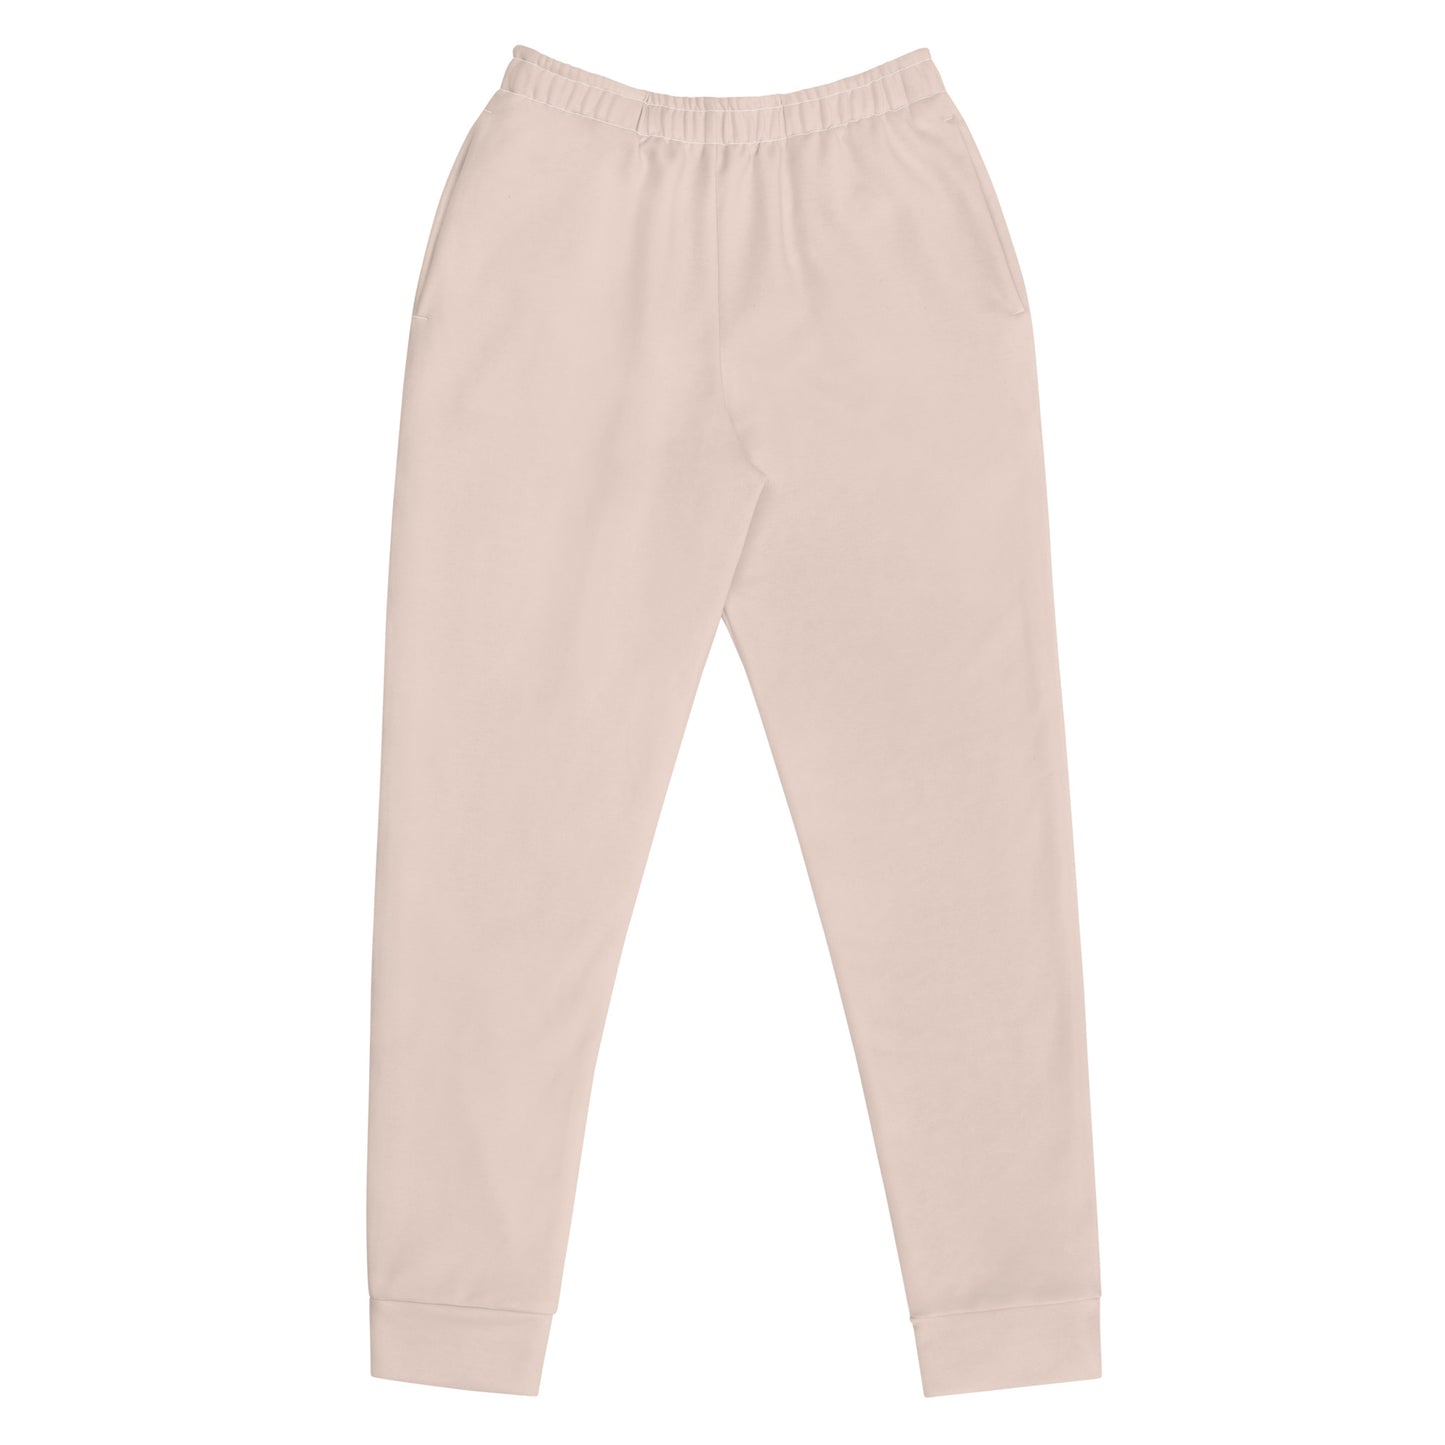 Humble Sportswear, women’s color match fleece joggers with pockets 